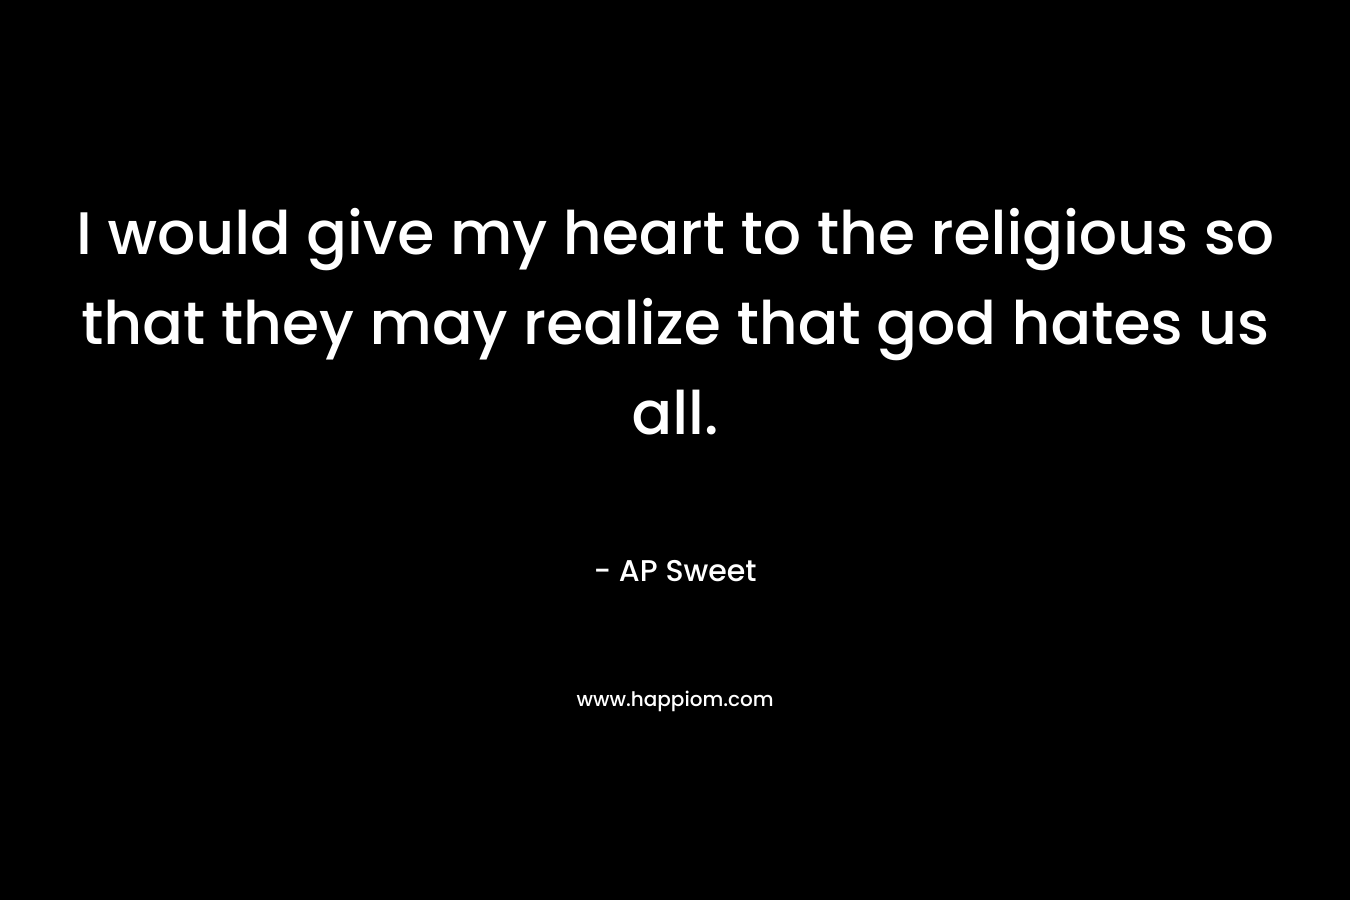 I would give my heart to the religious so that they may realize that god hates us all.